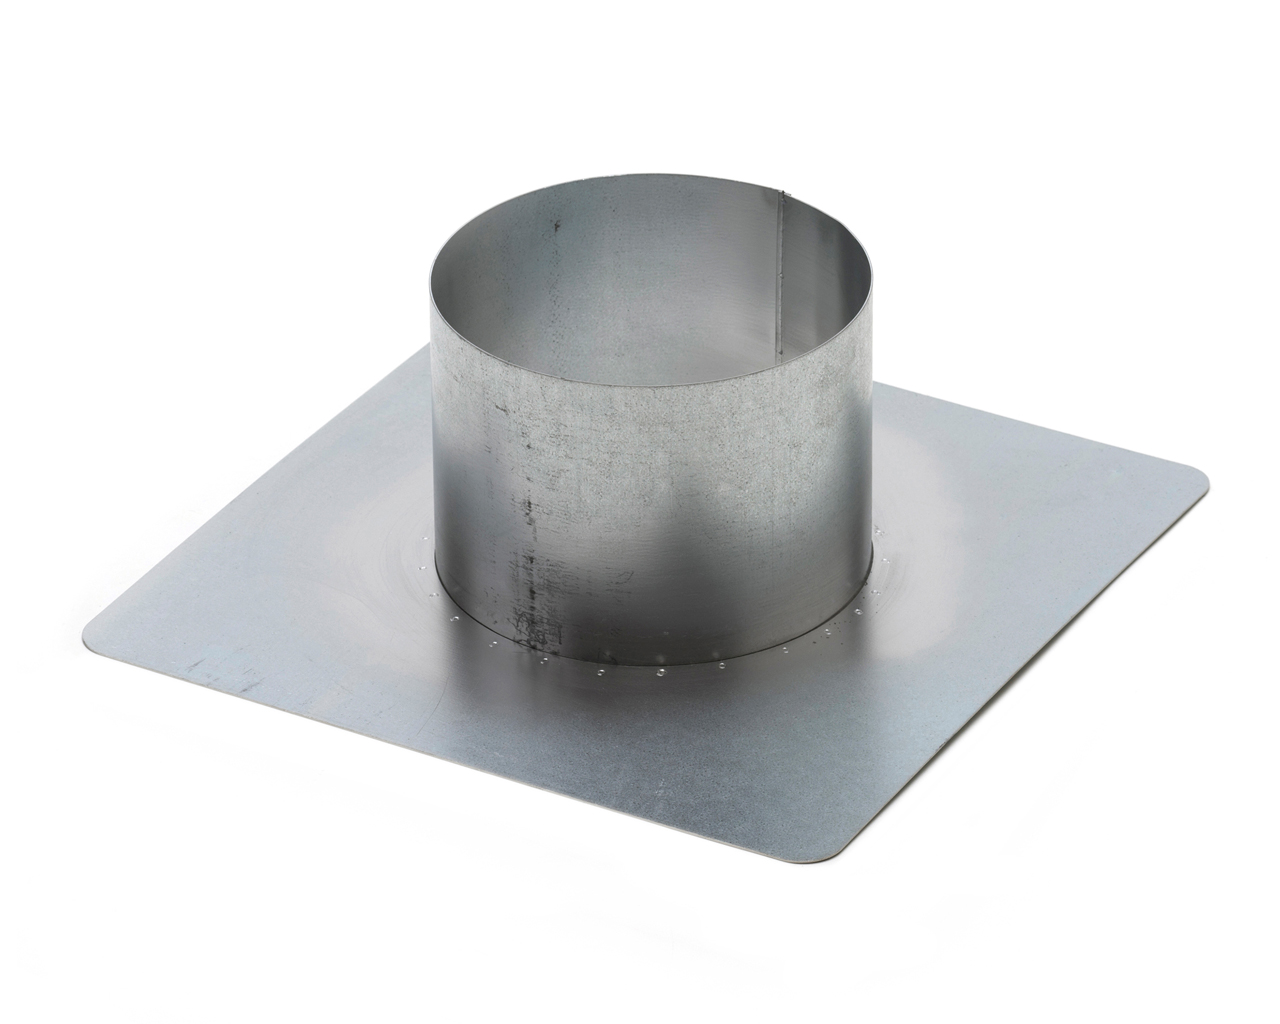 PLPL1.008 Wall plate take-off type 1 (PLPL1) The PLPL1 Wall plate take-off type 1 is a welded plate with on one side a raised welded opening that is around 20 mm larger than the duct diameter.